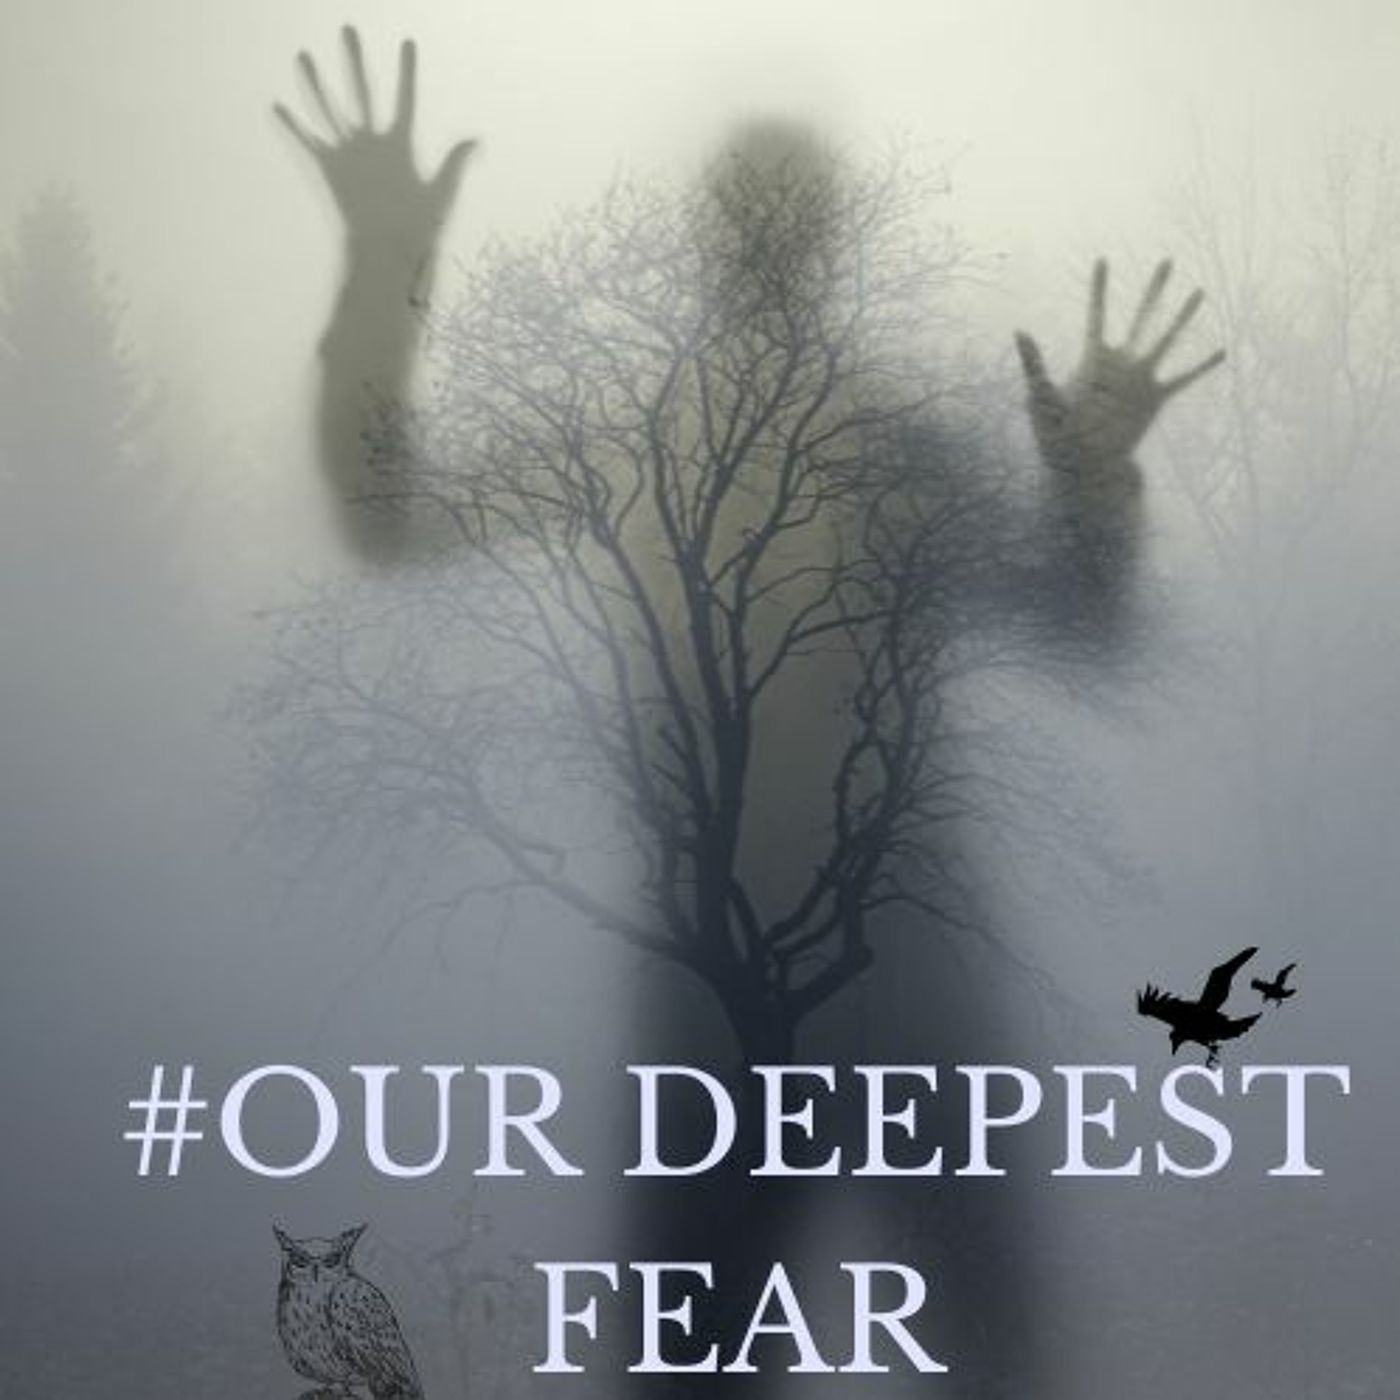 #OUR DEEPEST FEAR!